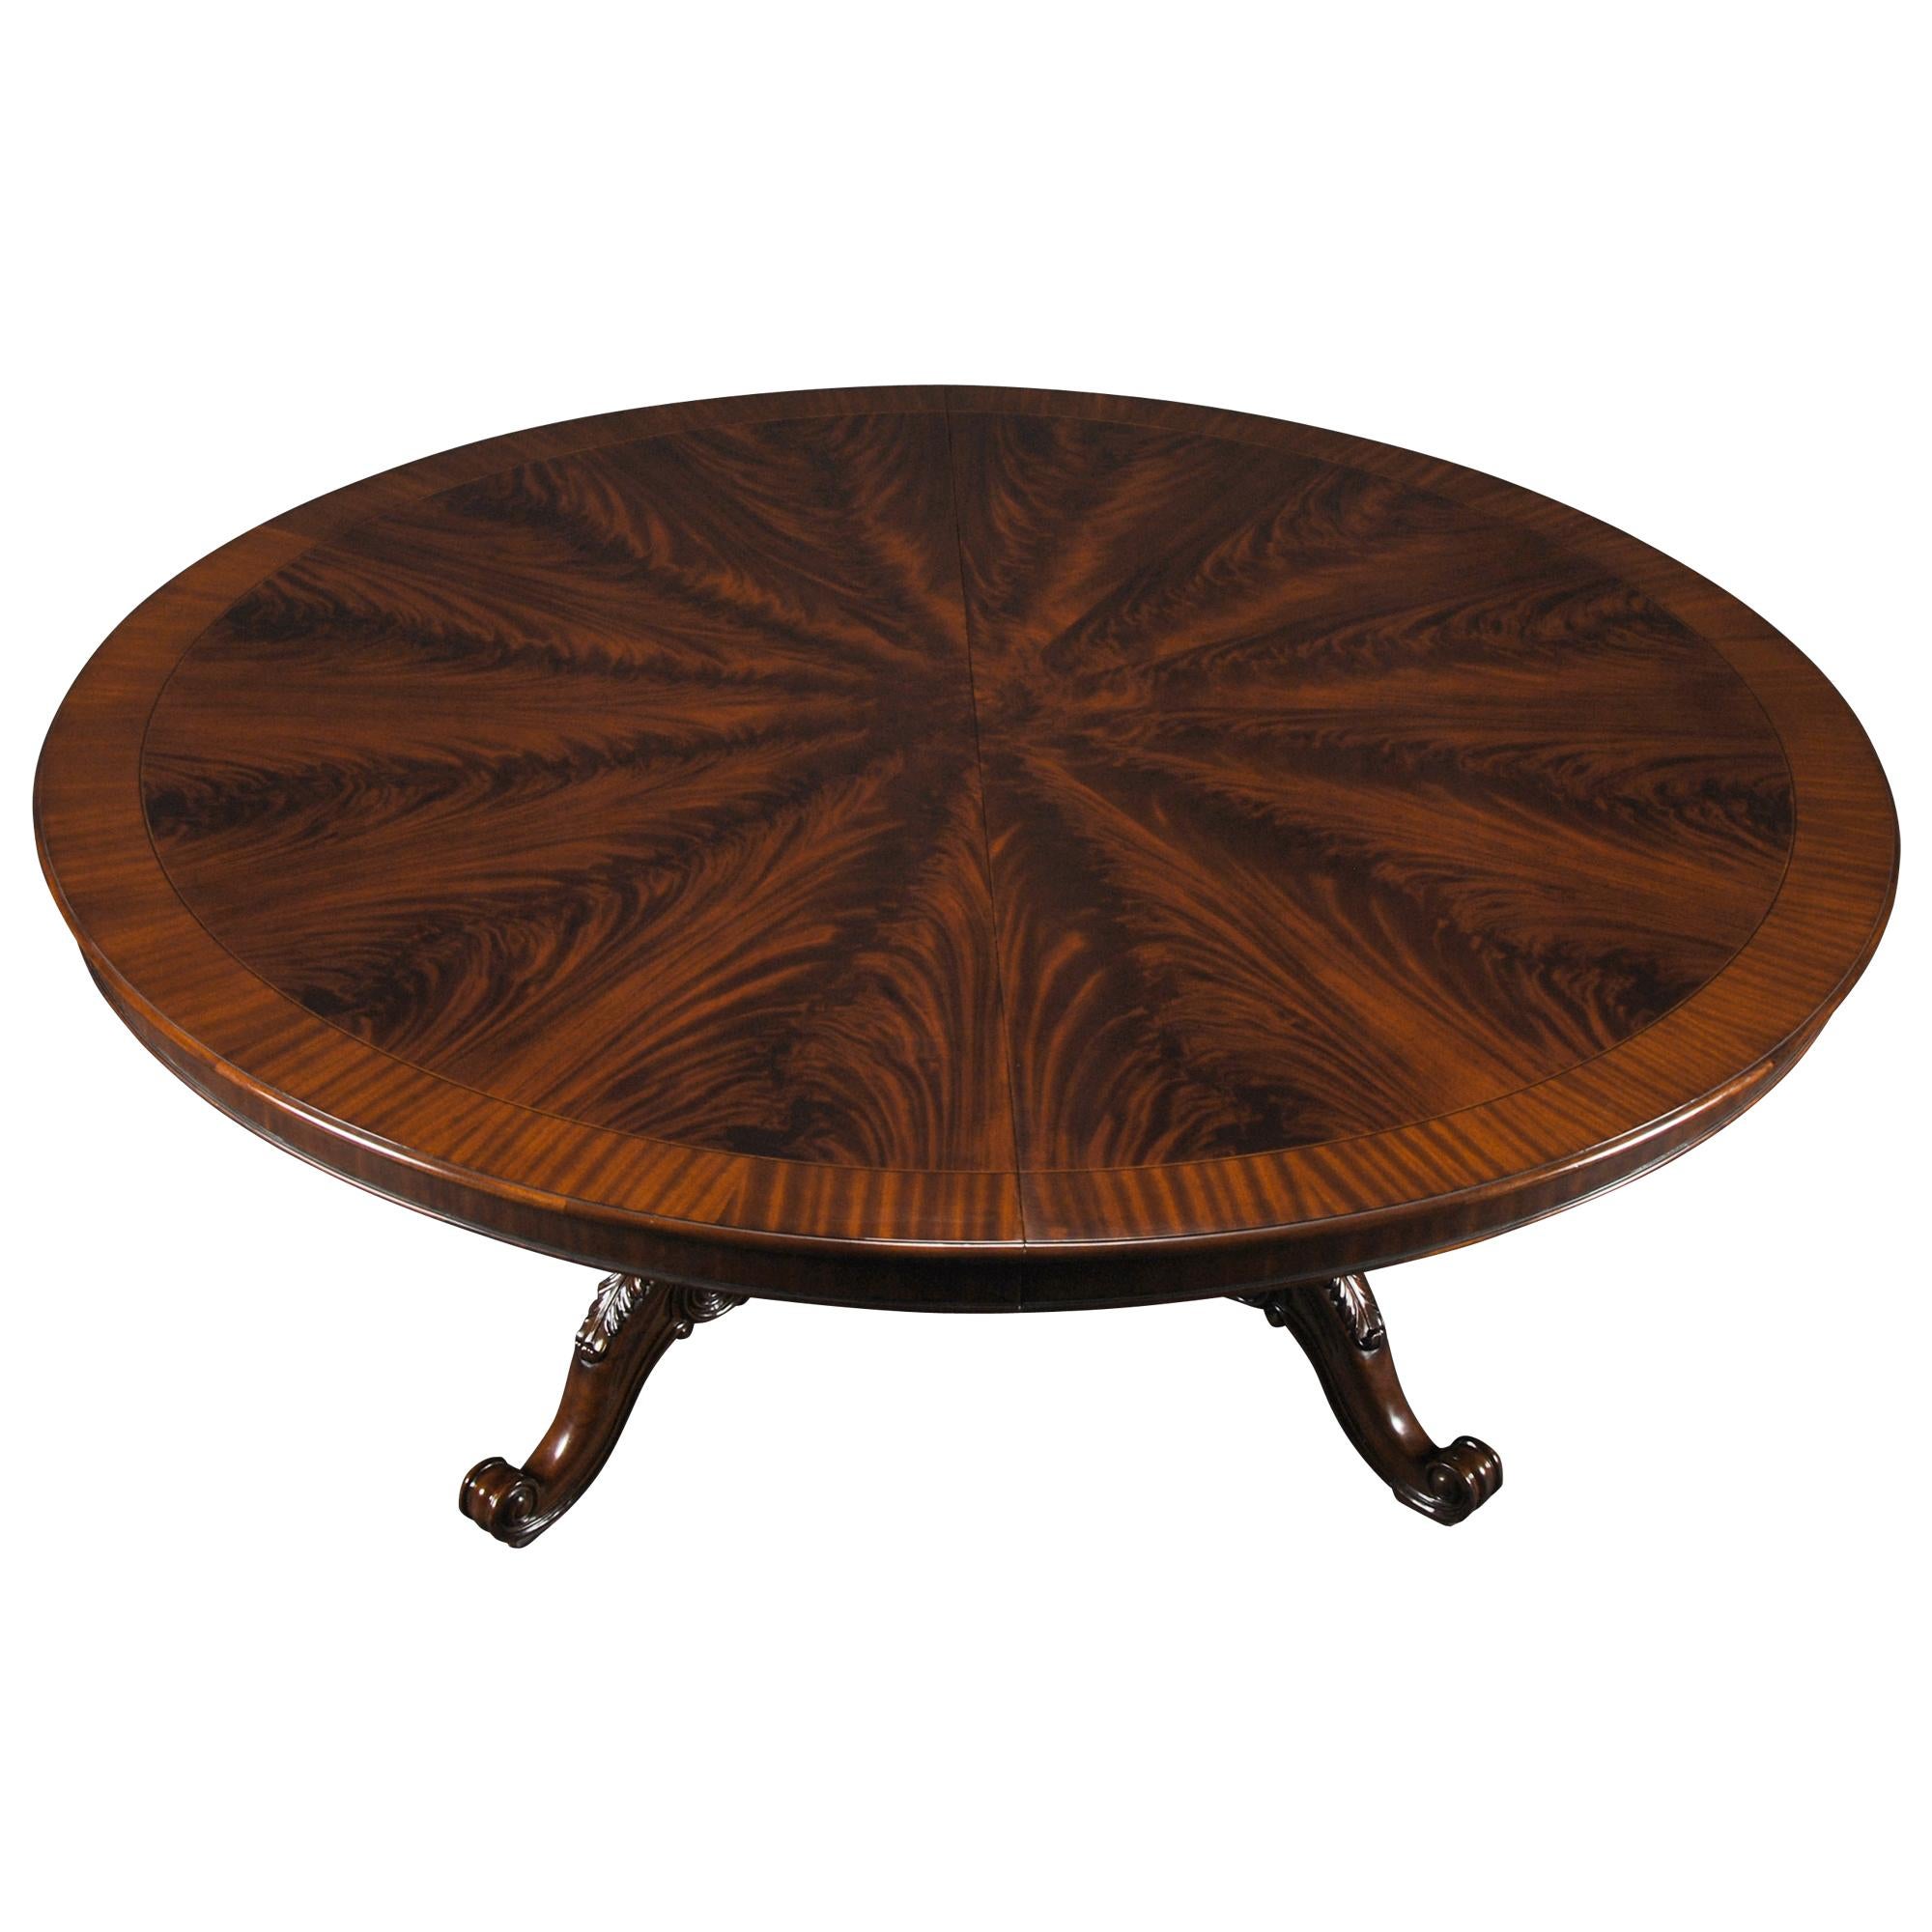 The Round 84 inch Table is finished in medium brown tones and a mahogany banding gives our  table a traditional appearance. This is a high quality dining table with a smooth polished top over the field of finely figured mahogany.  The top of the